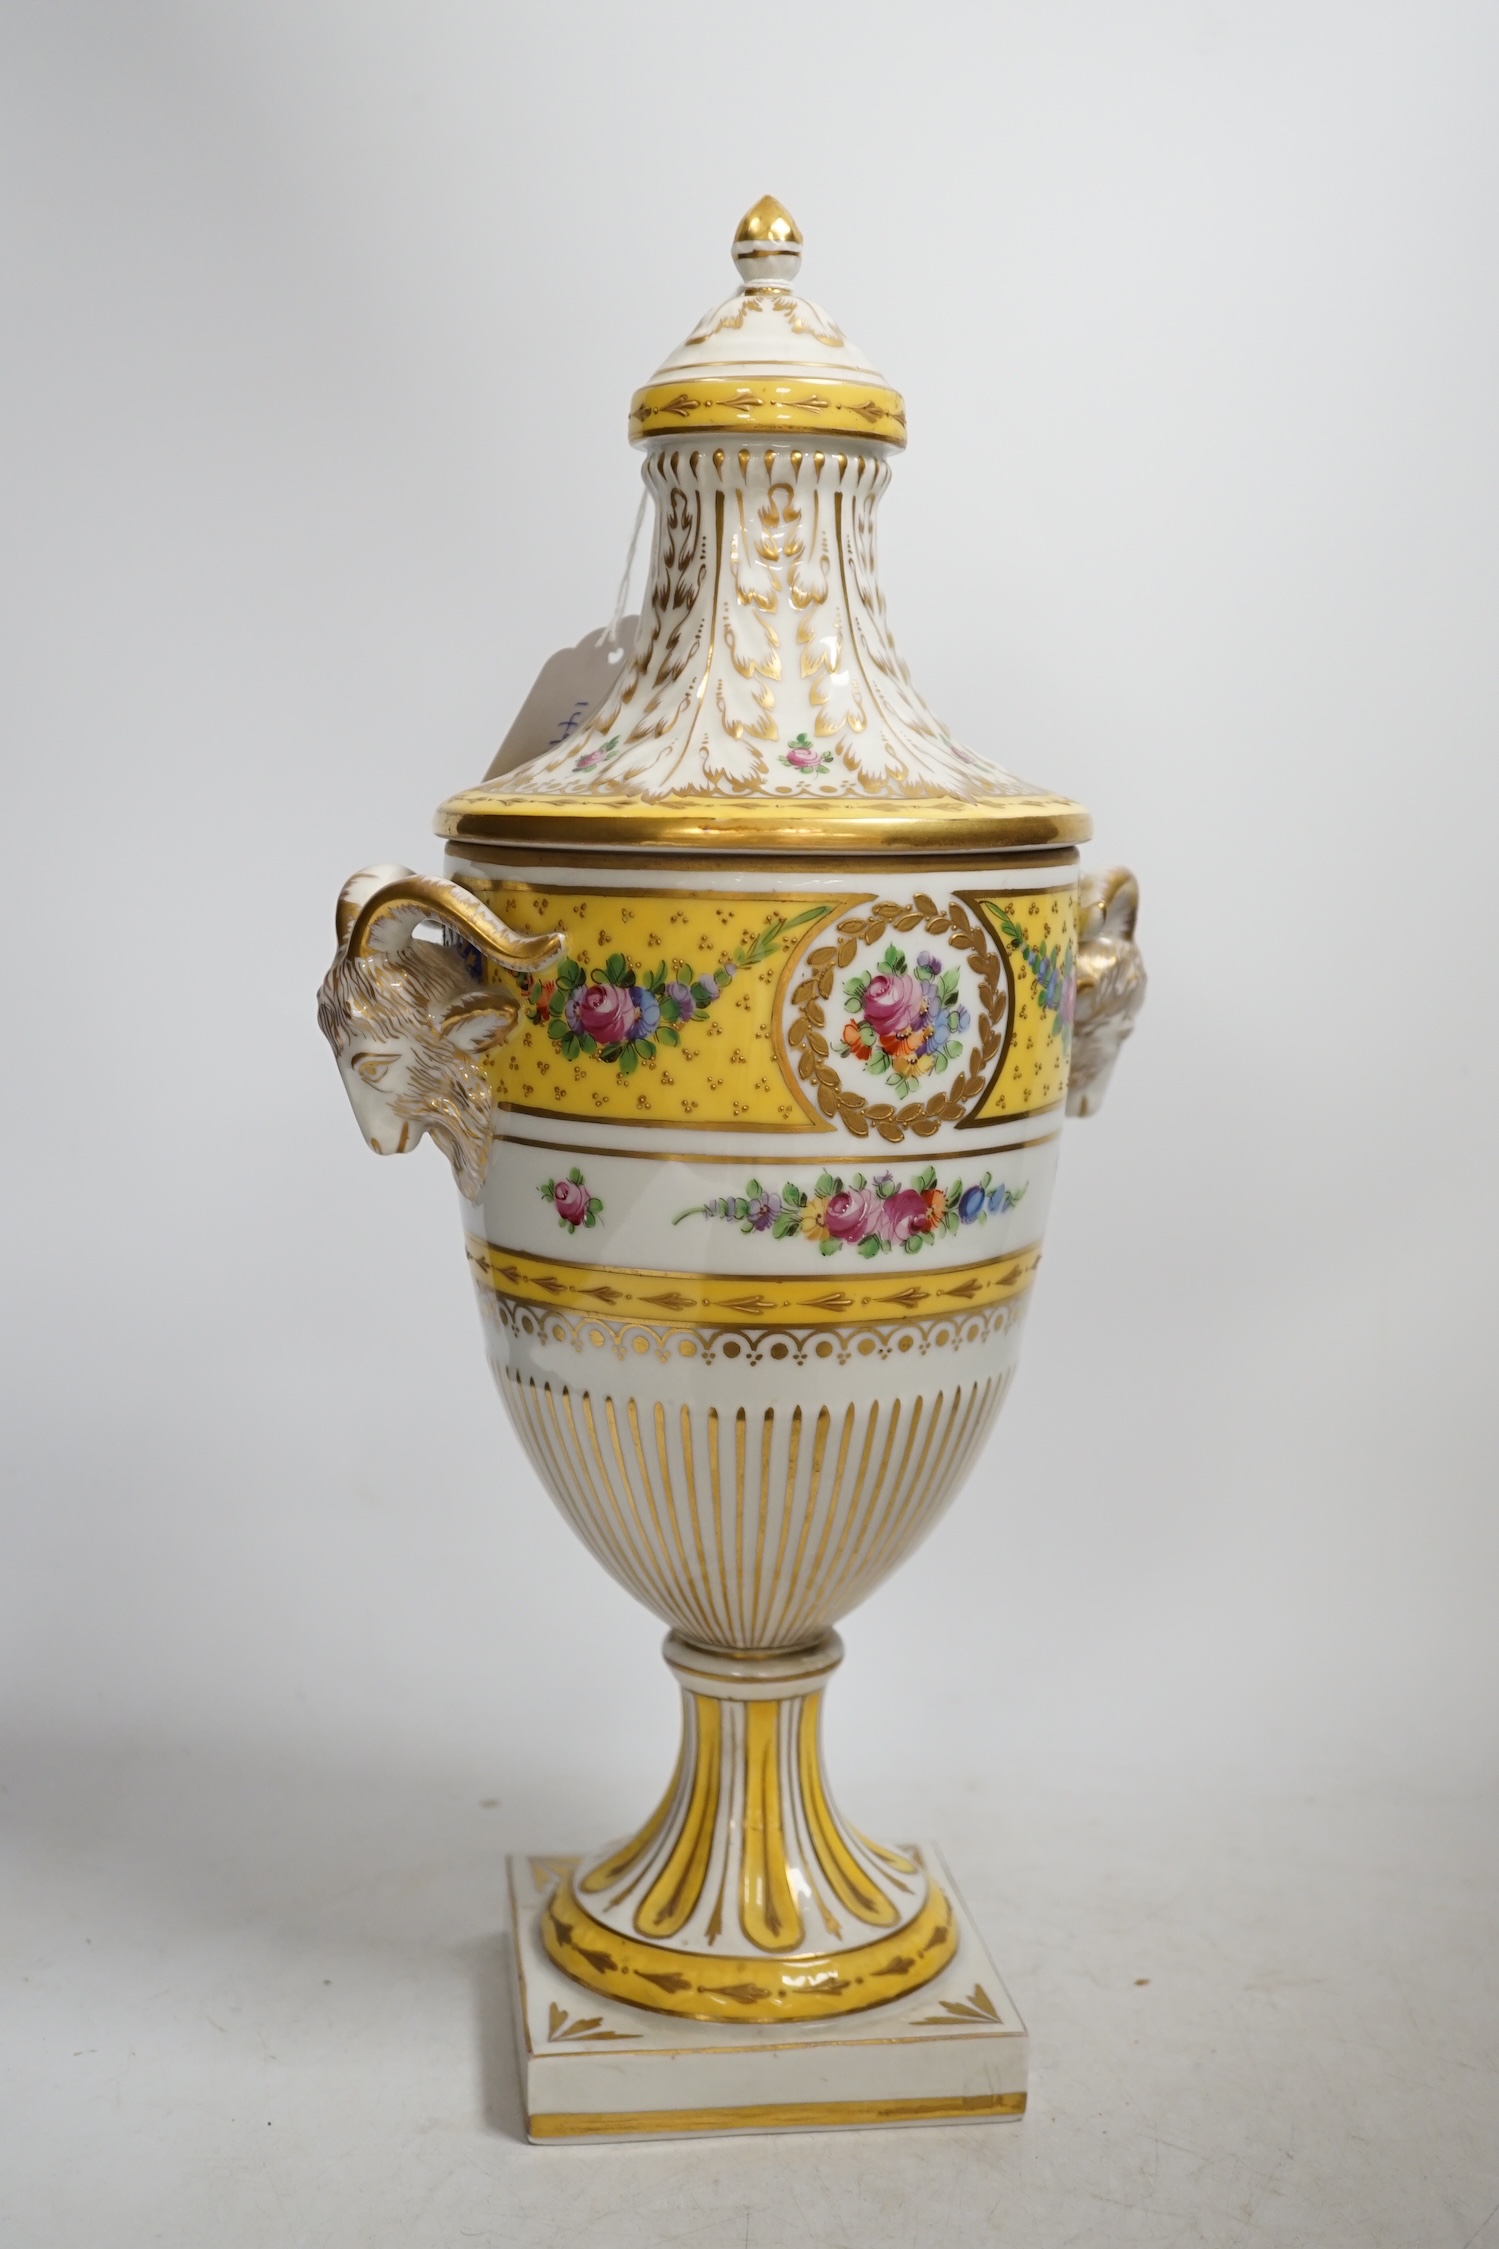 A 20th century Sevres style porcelain urn and cover, 38cm. Condition - fair to good